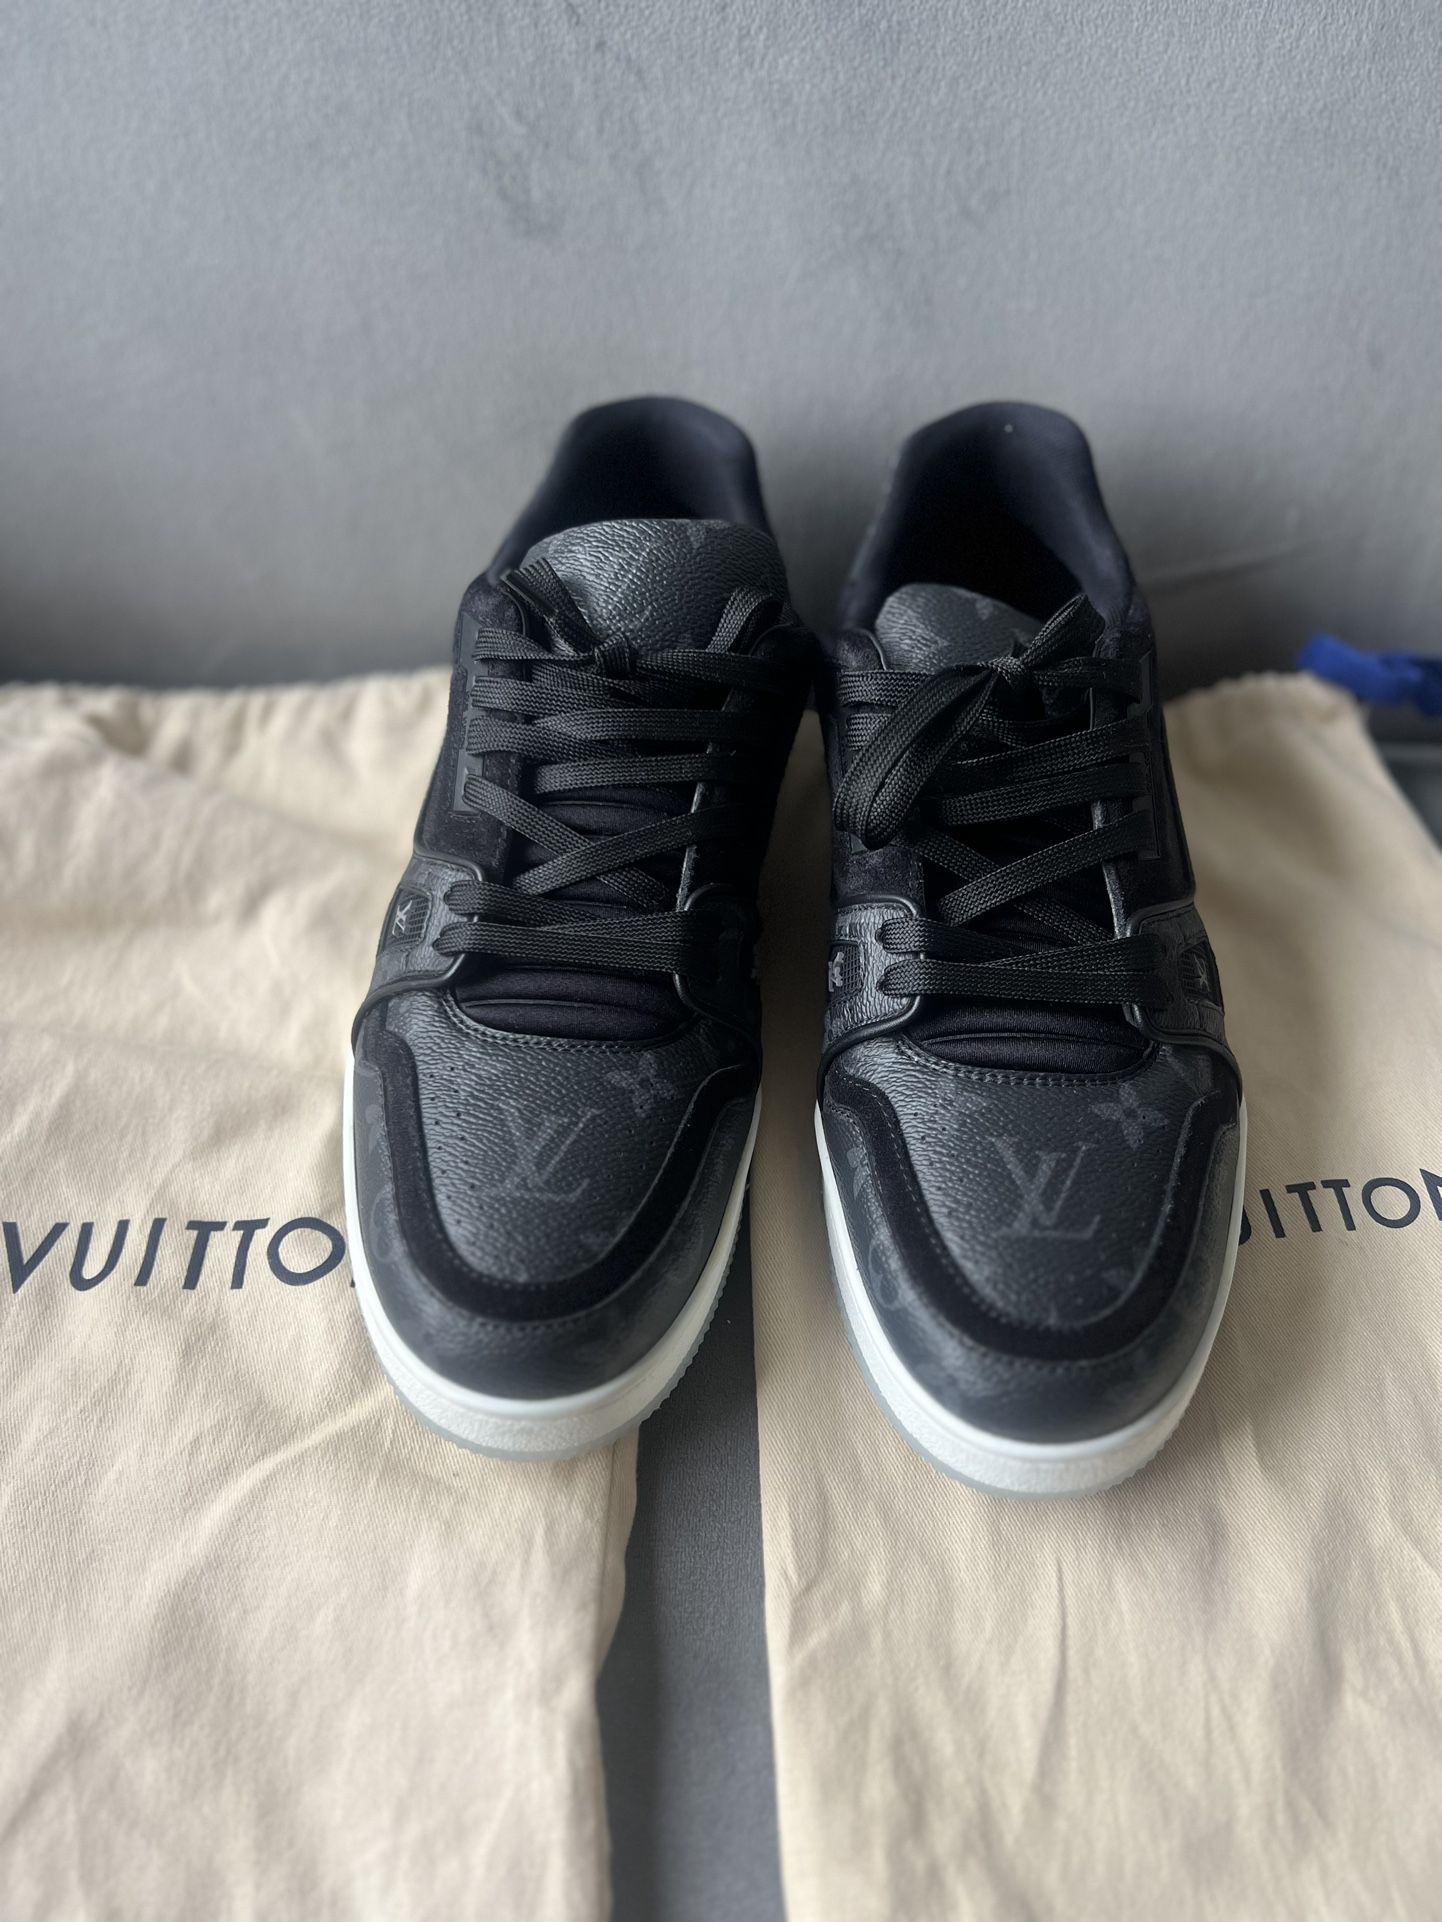 LOUIS VUITTON Sneakers for Women for Sale in Miami, FL - OfferUp